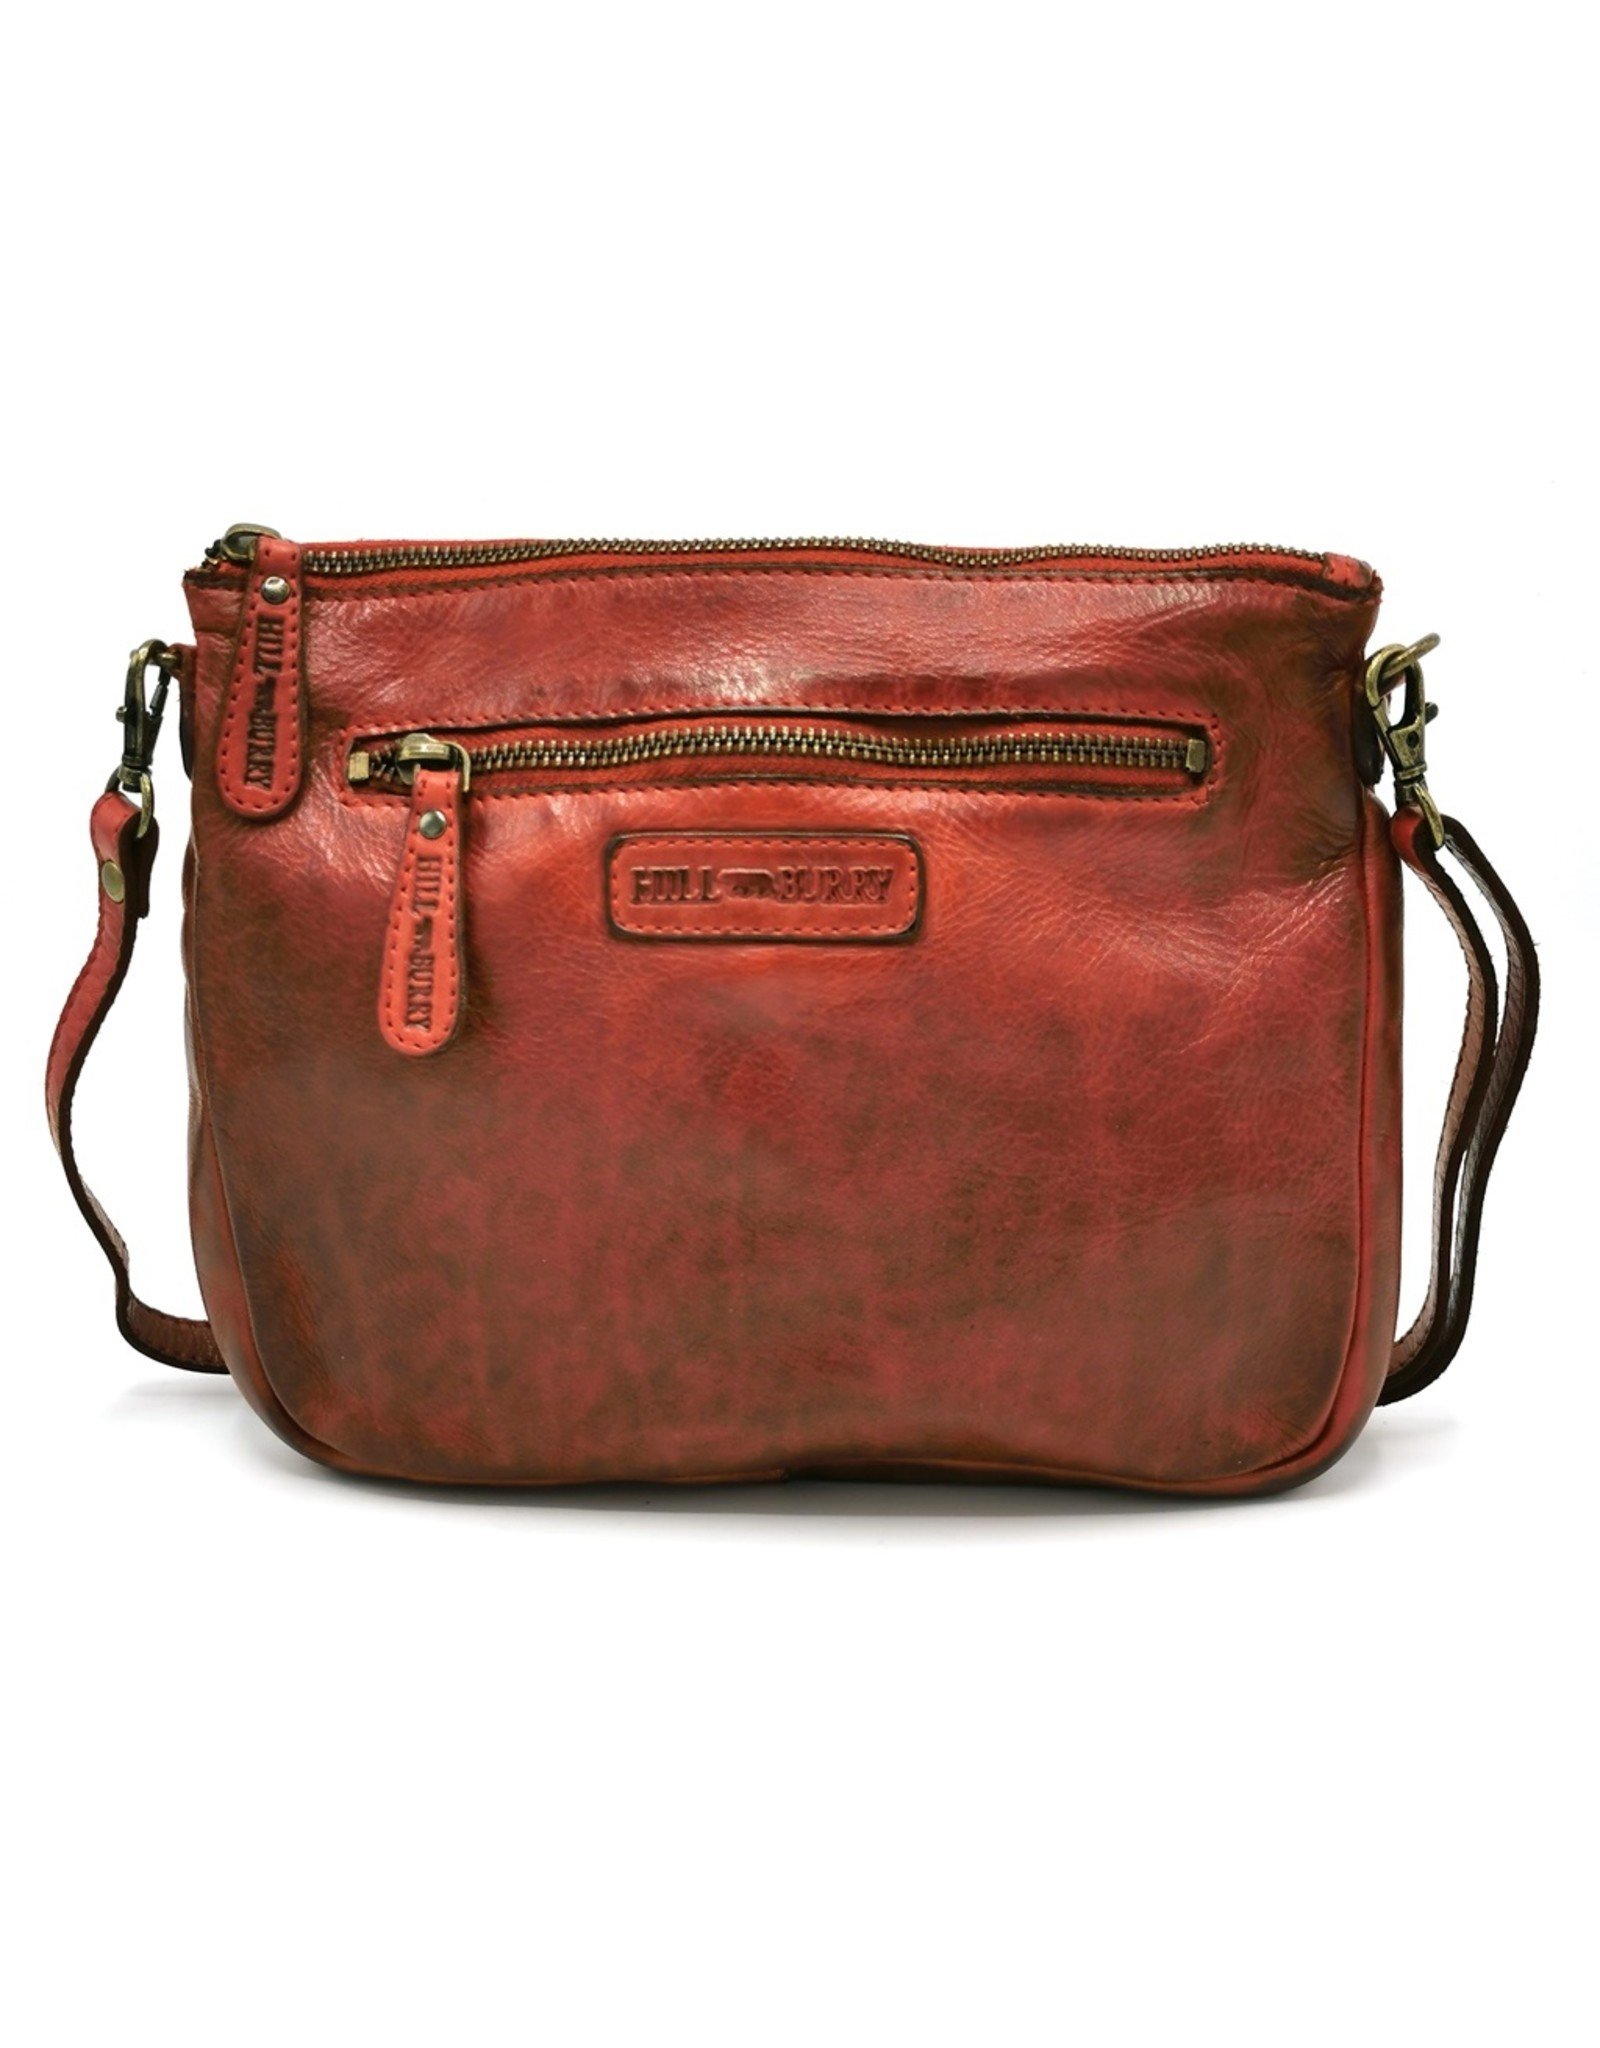 HillBurry Small leather bags, clutches and more - Hillburry Shoulder Bag - Clutch Washed Leather red